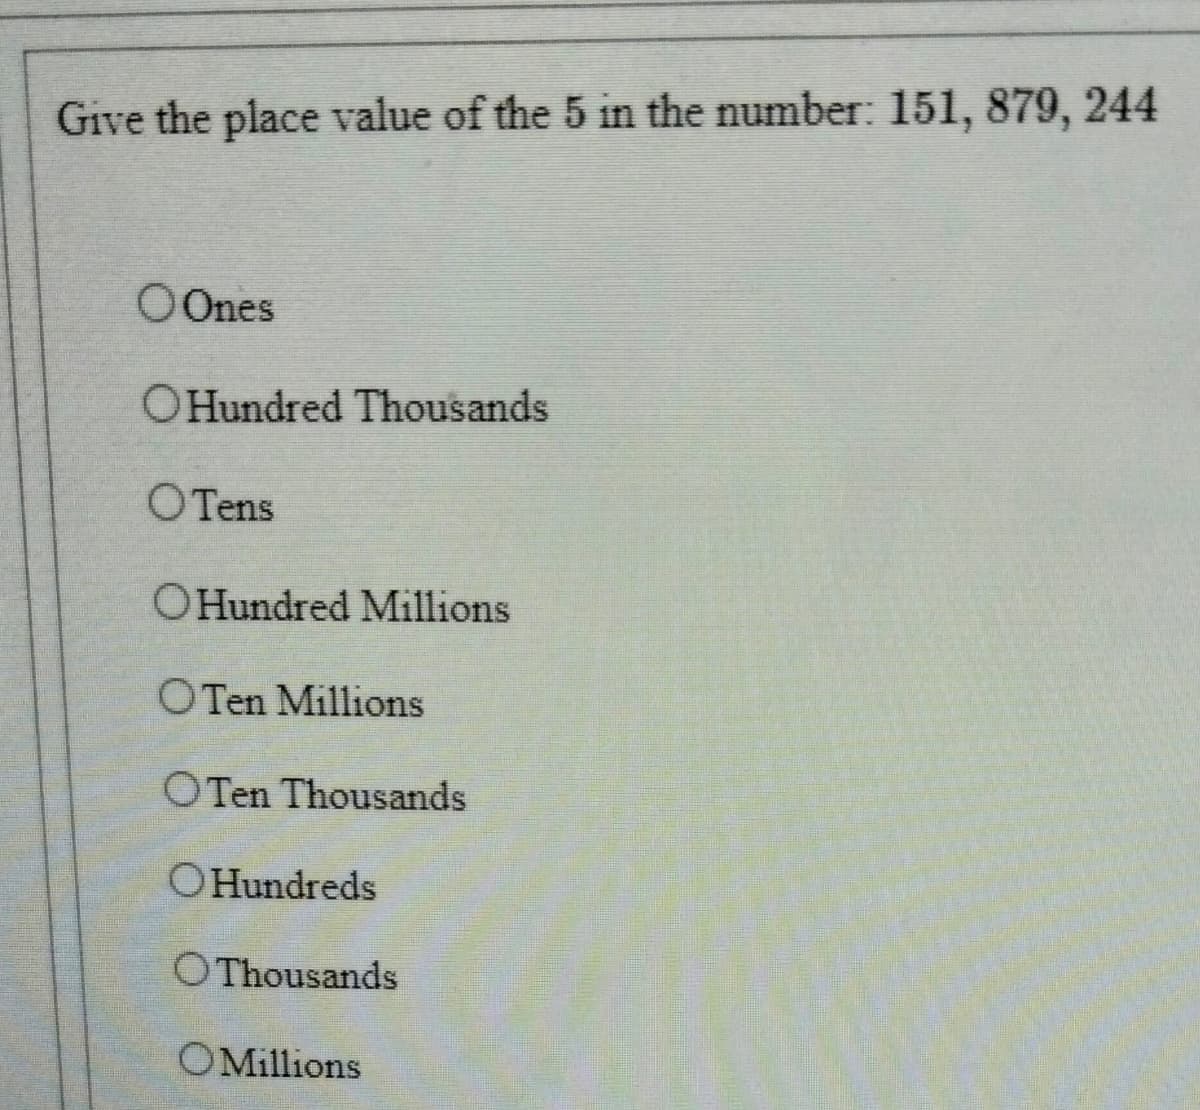 Give the place value of the 5 in the number: 151, 879, 244
O Ones
OHundred Thousands
OTens
OHundred Millions
OTen Millions
OTen Thousands
OHundreds
OThousands
OMillions
